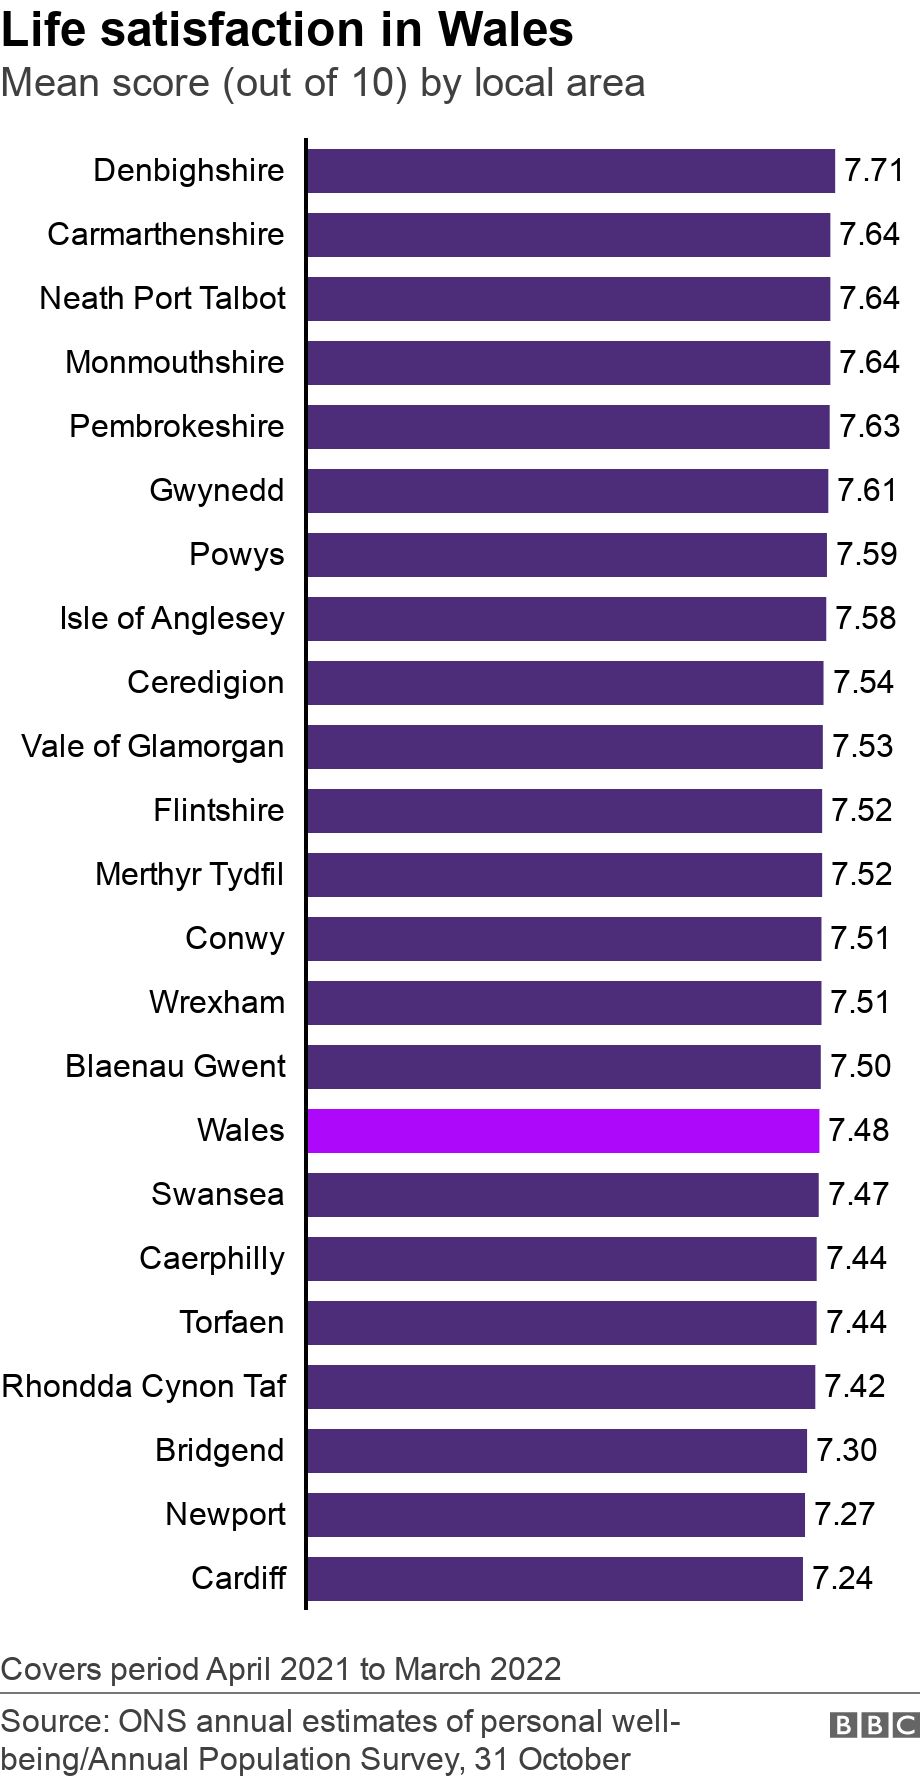 Graphic showing life satisfaction in all council areas across Wales